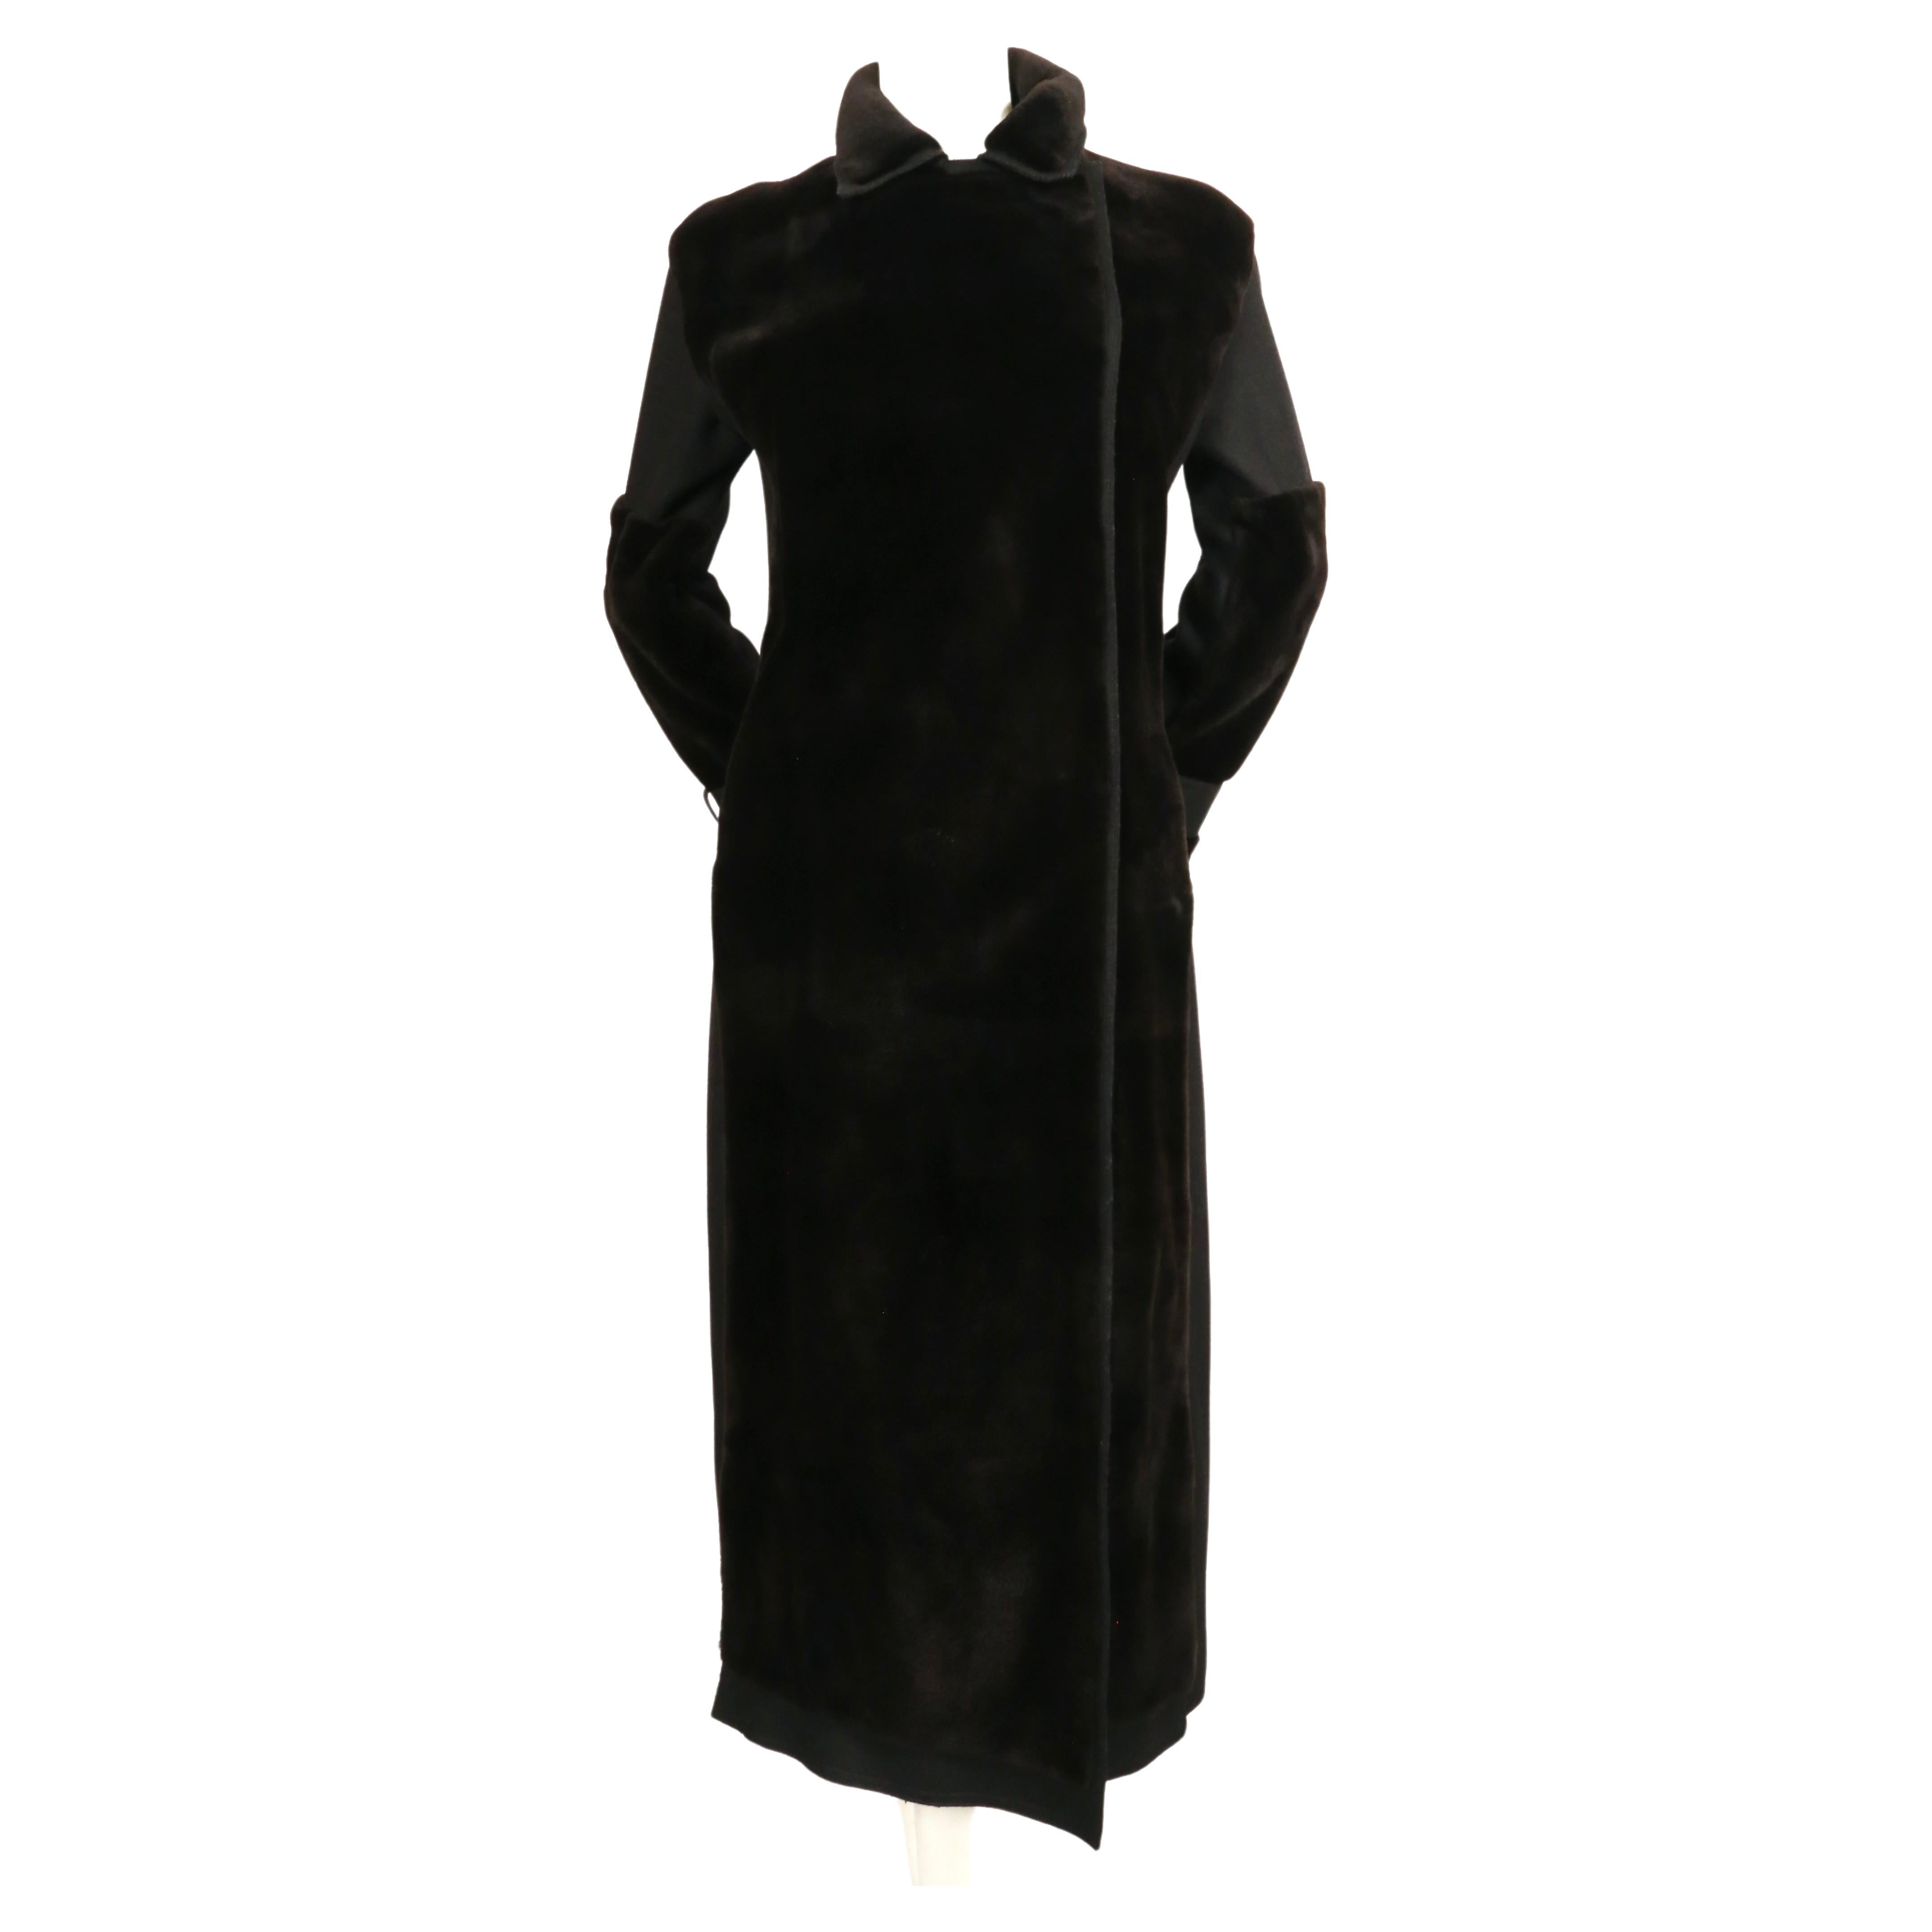 Striking dark brown mink fur coat with black felted wool panels from J. Mendel. The wool panels create a streamlined fit. There is no size is labeled but this best fits a US 2-4. Approximate measurements: shoulder 18